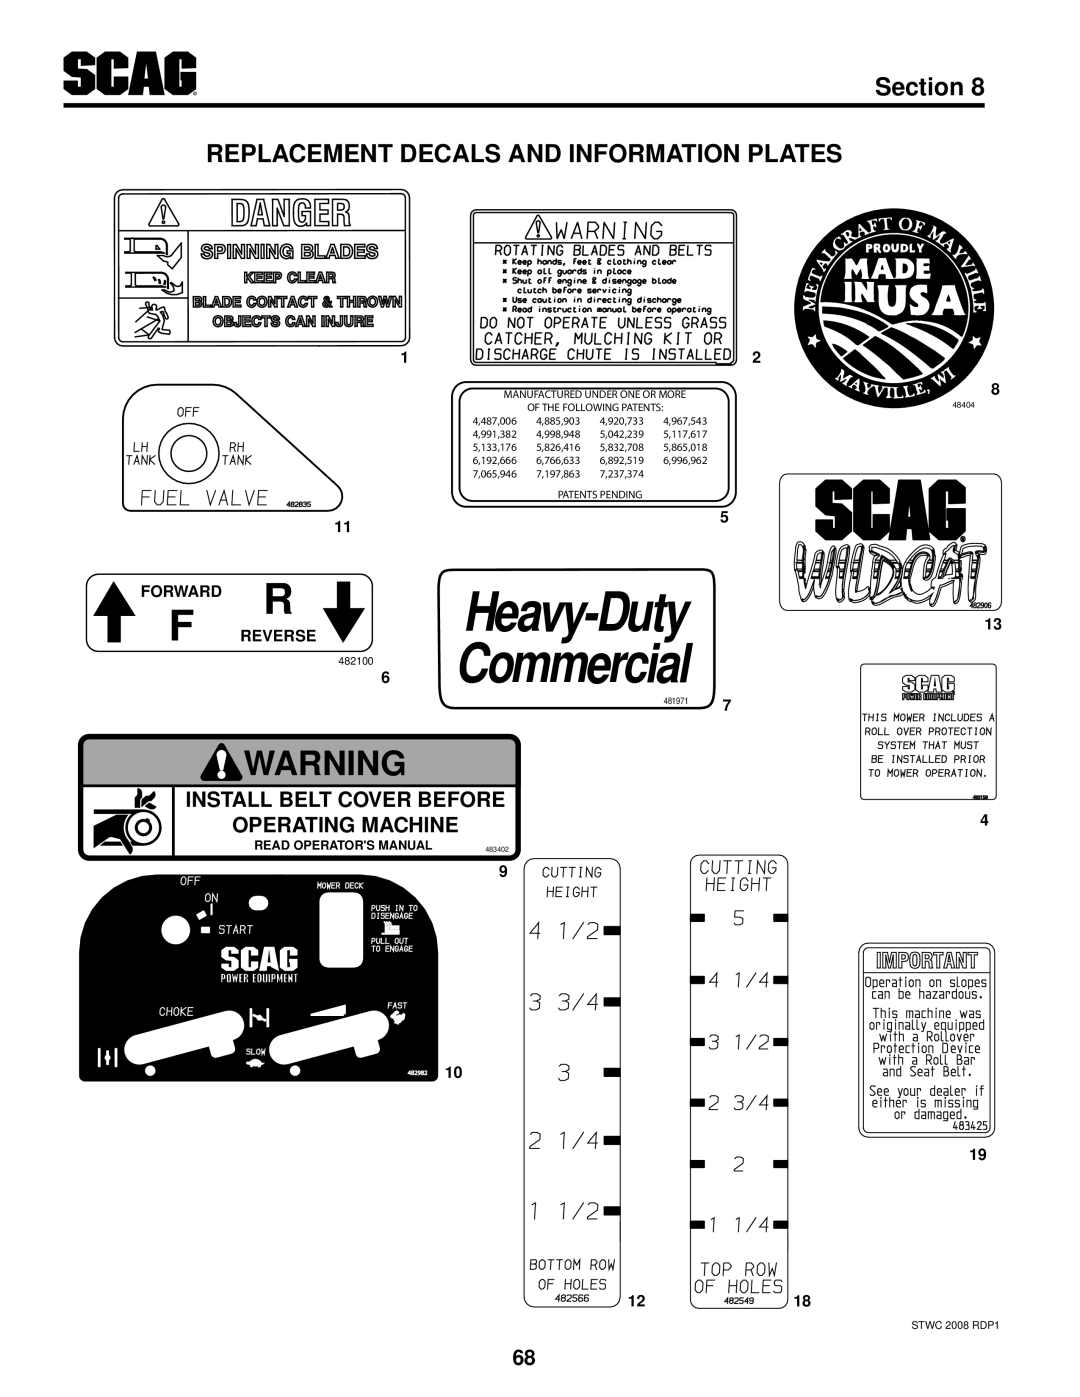 Scag Power Equipment STWC48V-26KA-LC Replacement Decals And Information Plates, Heavy-Duty, Commercial, Section, REvERSE 